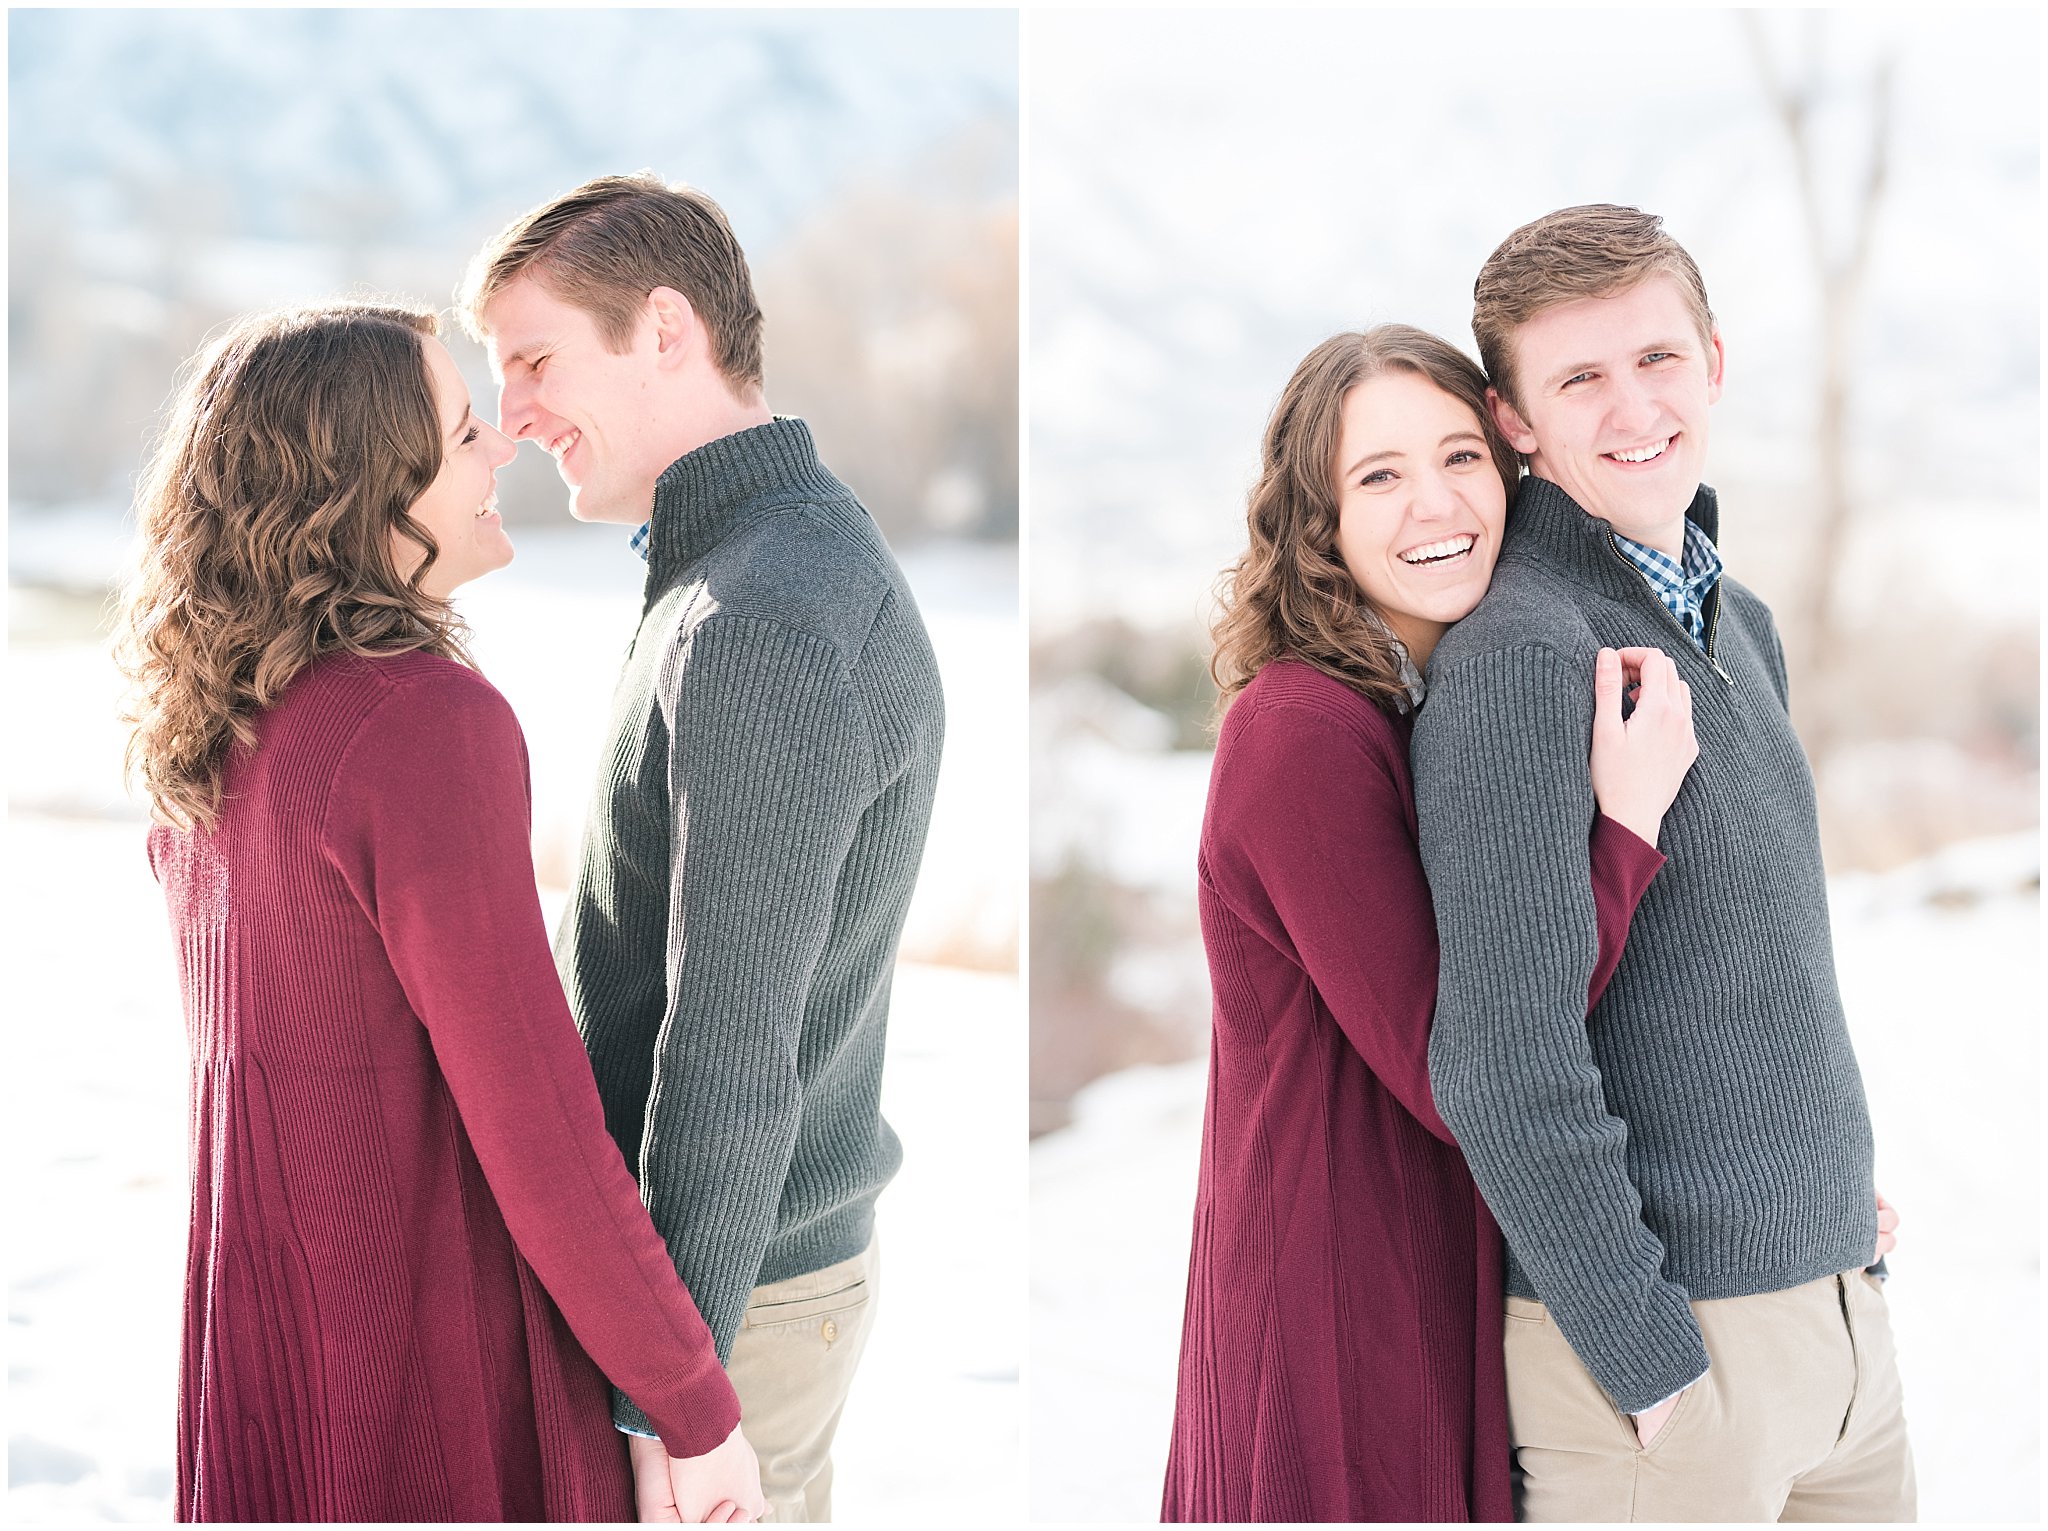 Snowy engagement session with couple in sweaters and boots in the mountains | Snowbasin Winter Engagement Session